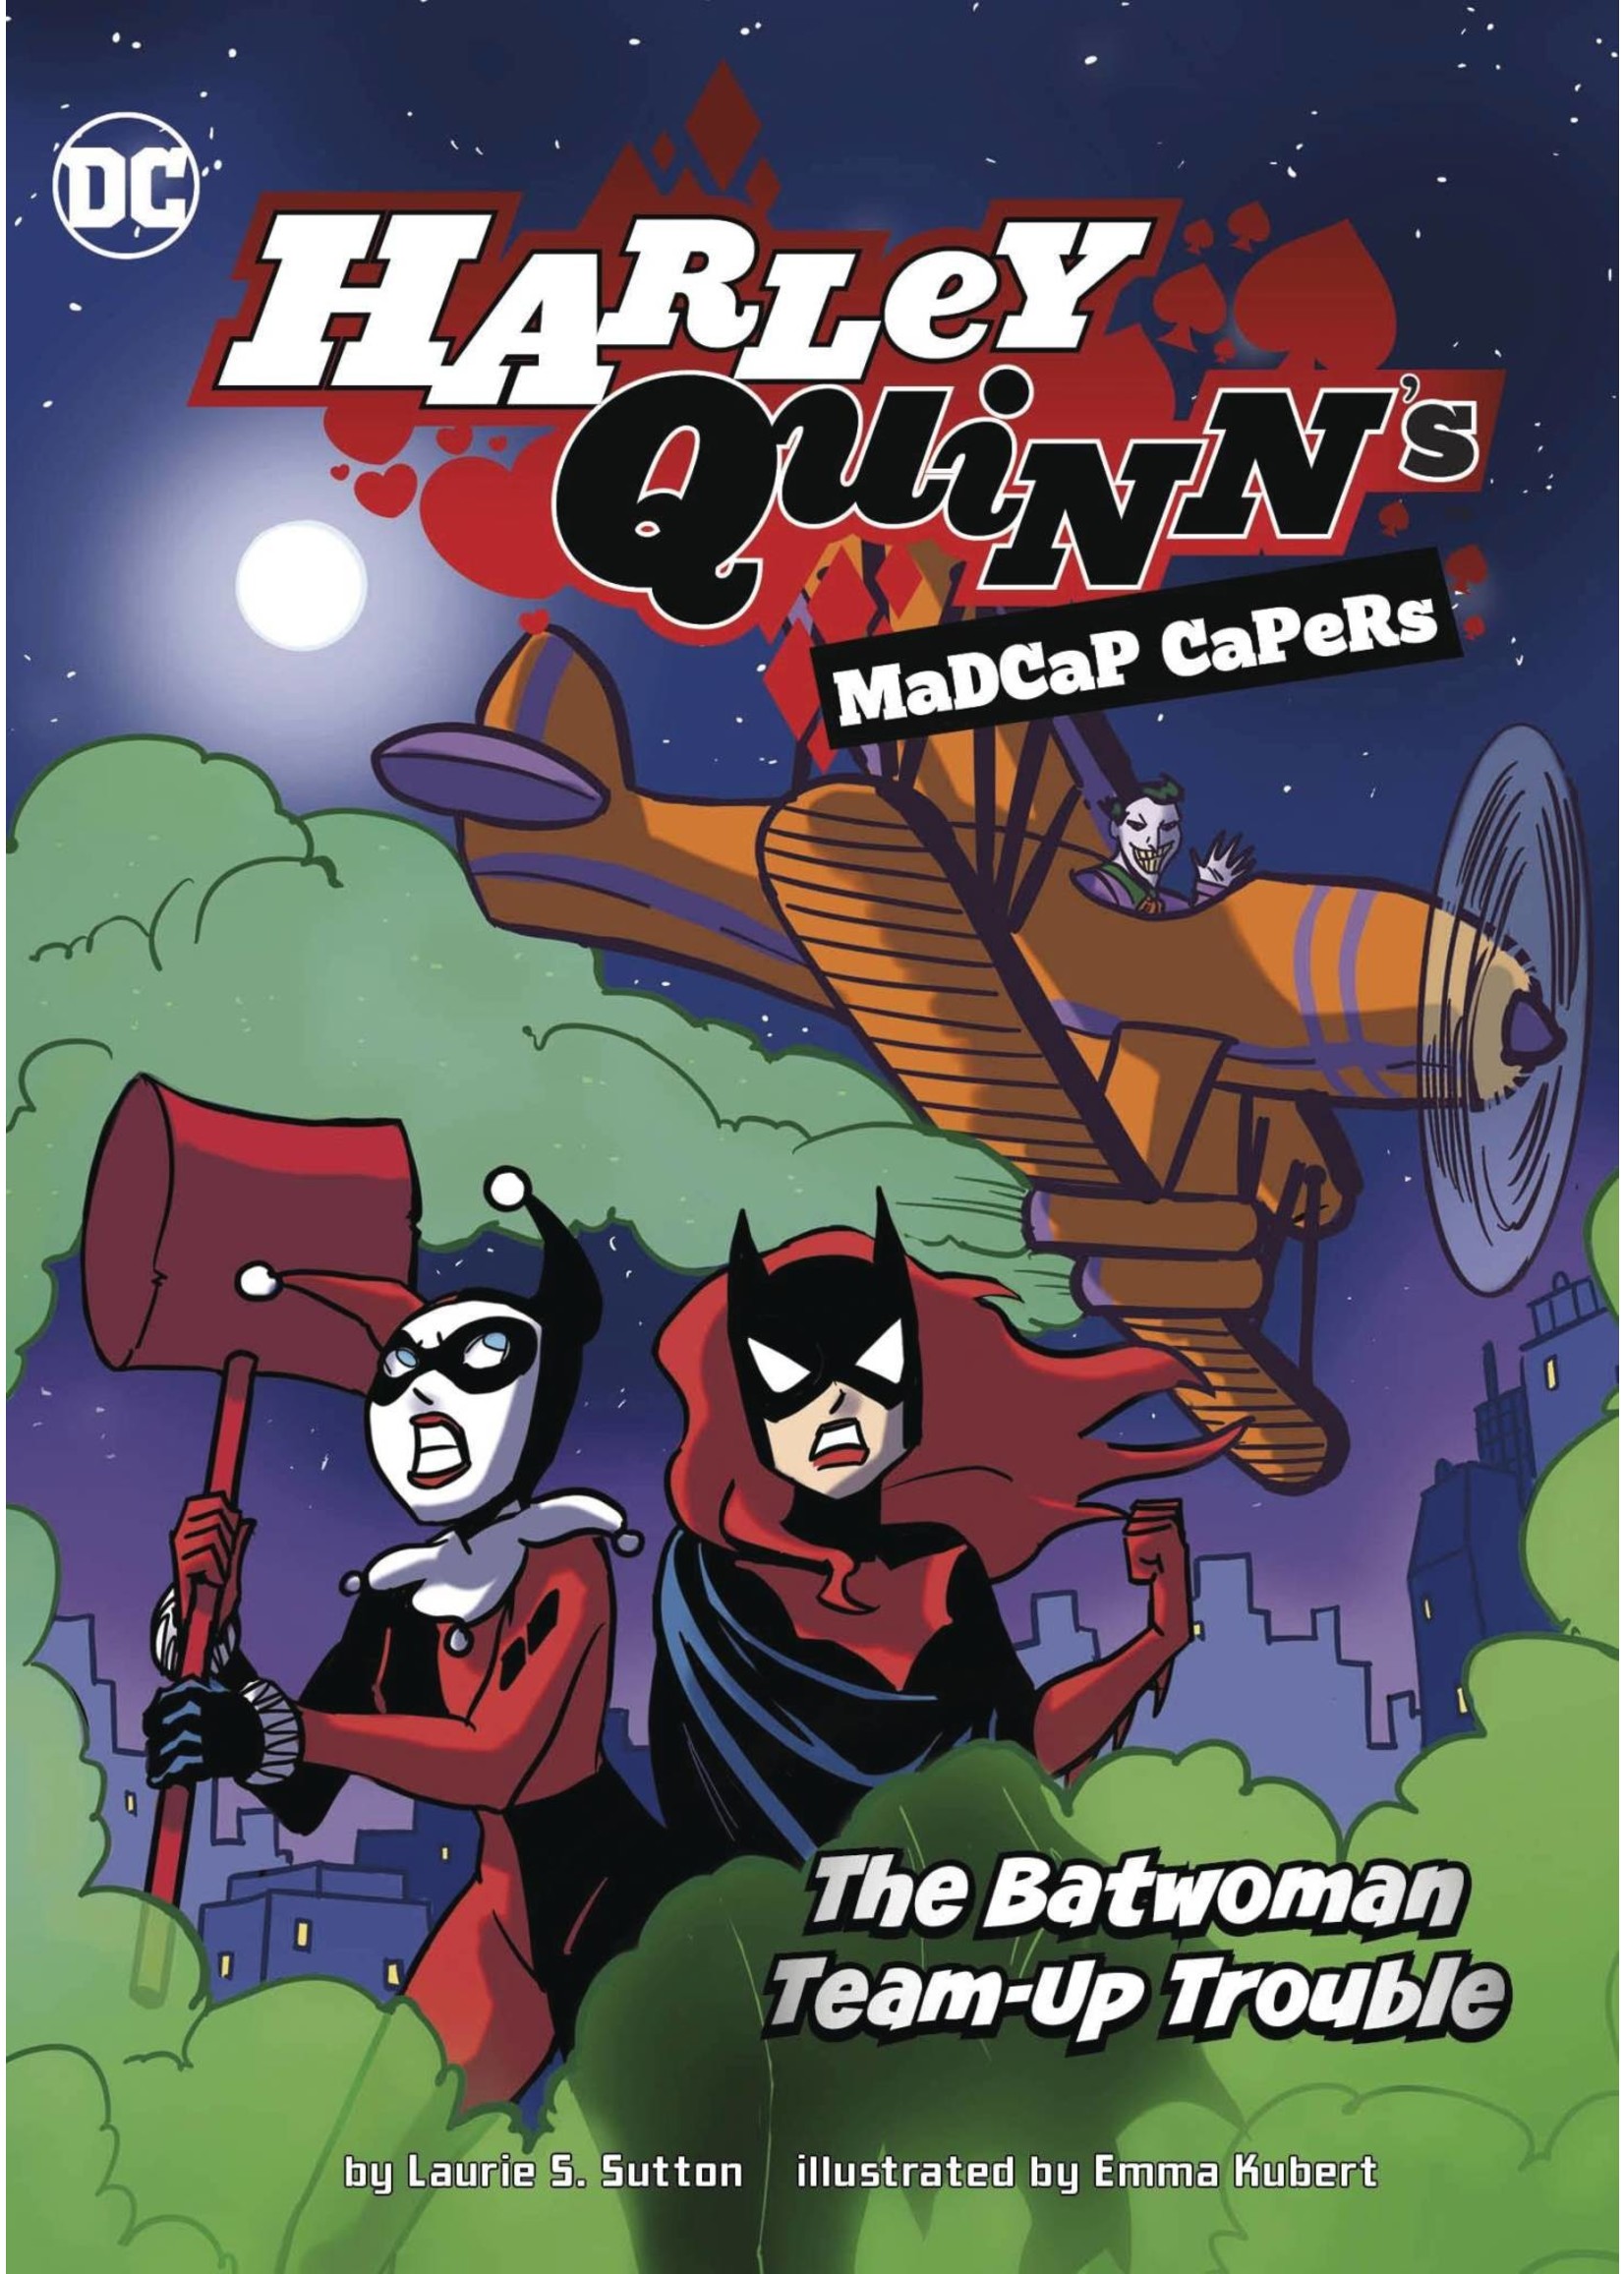 STONE ARCH BOOKS HARLEY QUINN MADCAP CAPERS BATWOMANS TEAM UP TROUBLE